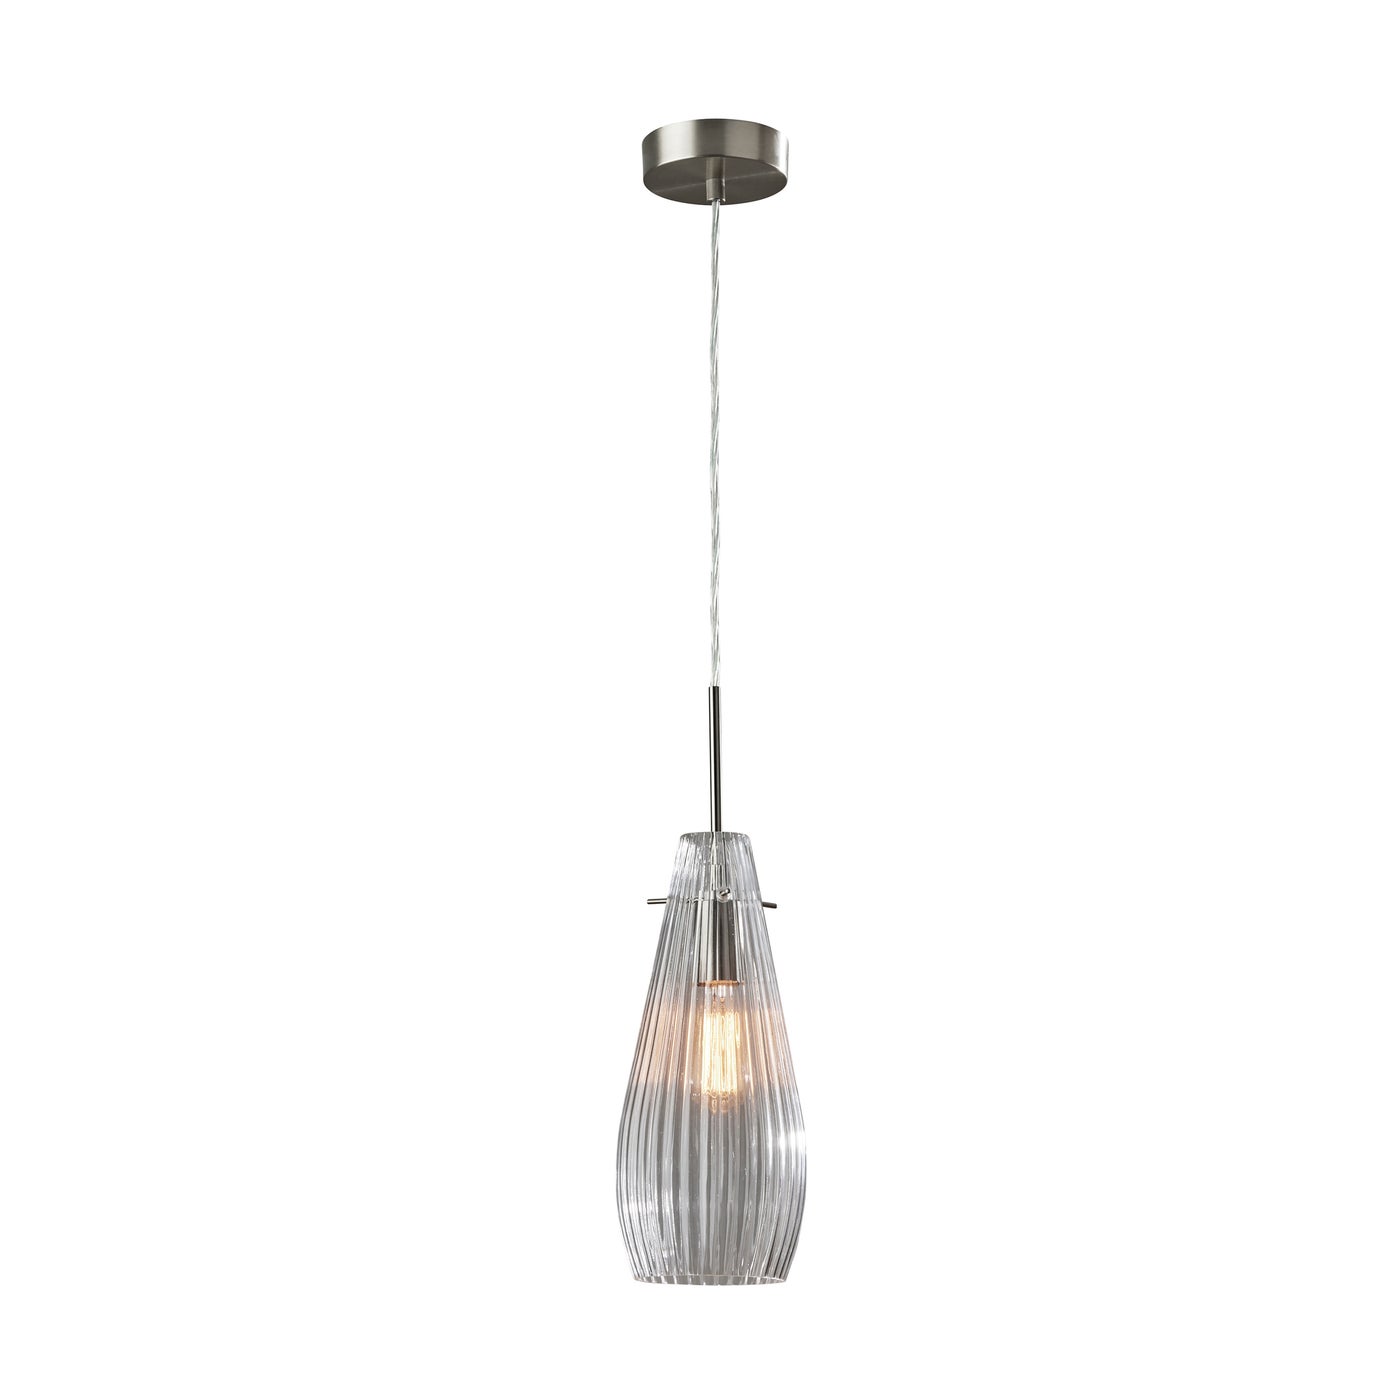 Adesso Home - 2146-22 - Pendant - Layla - Brushed Steel